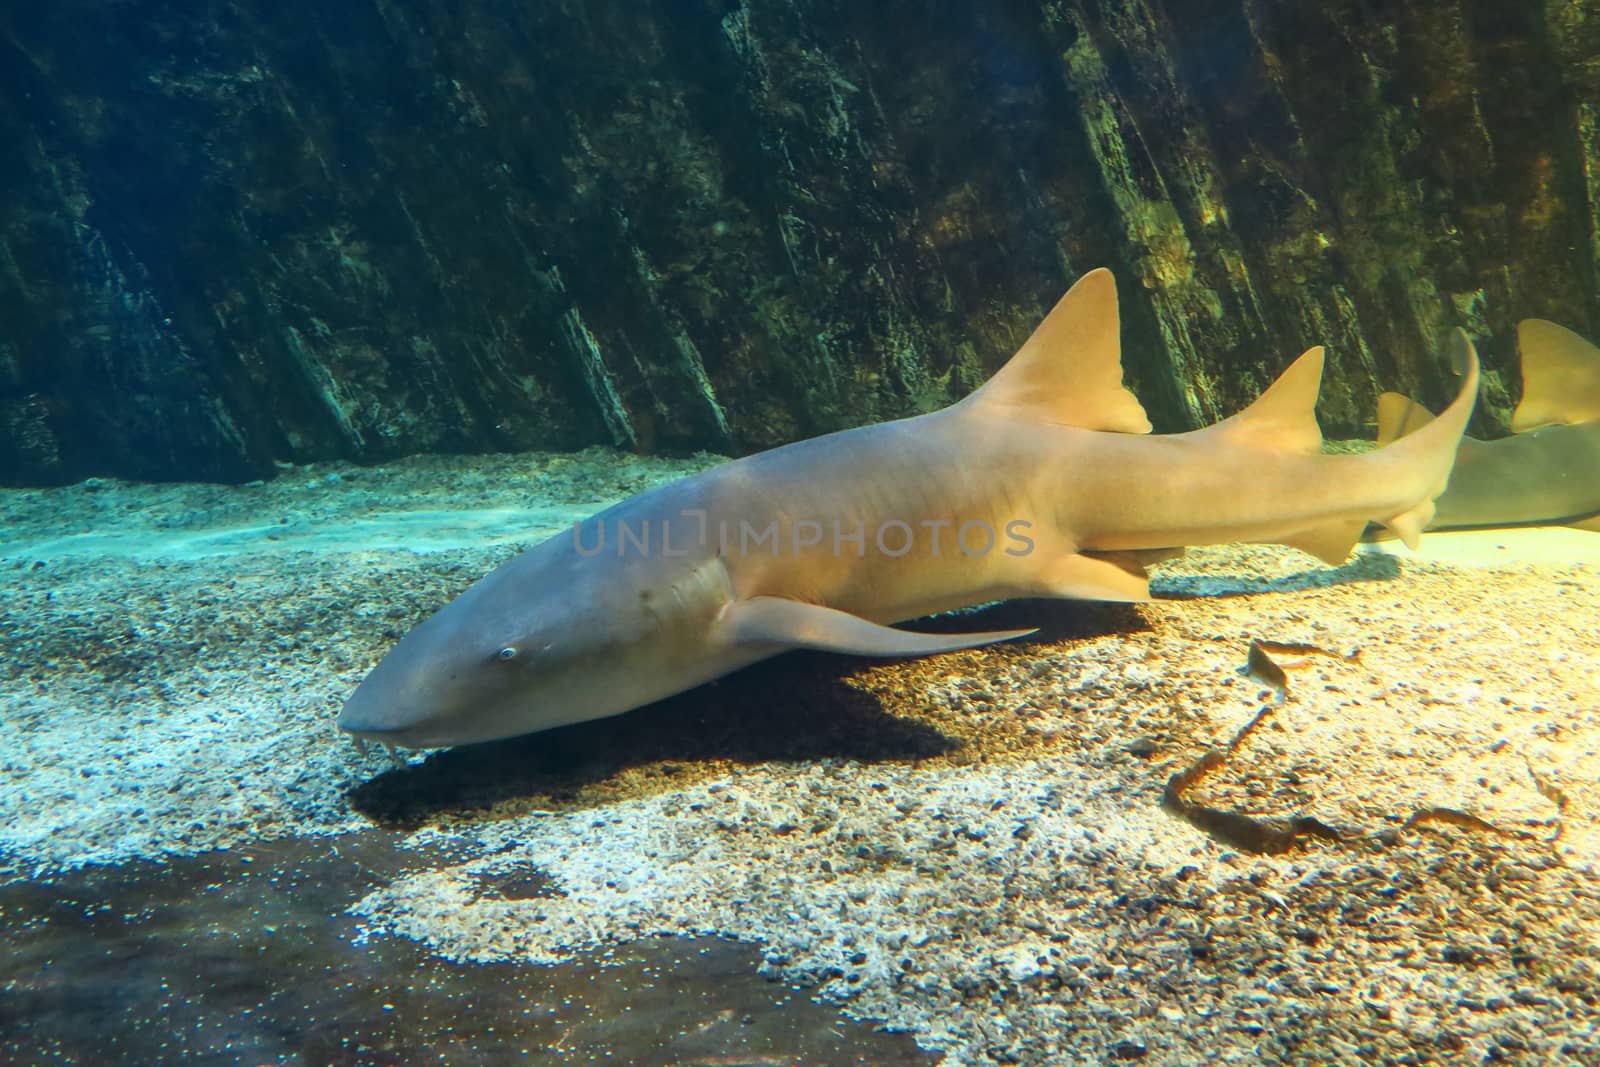 View of a nurse shark on a seabed, about 3 meters long